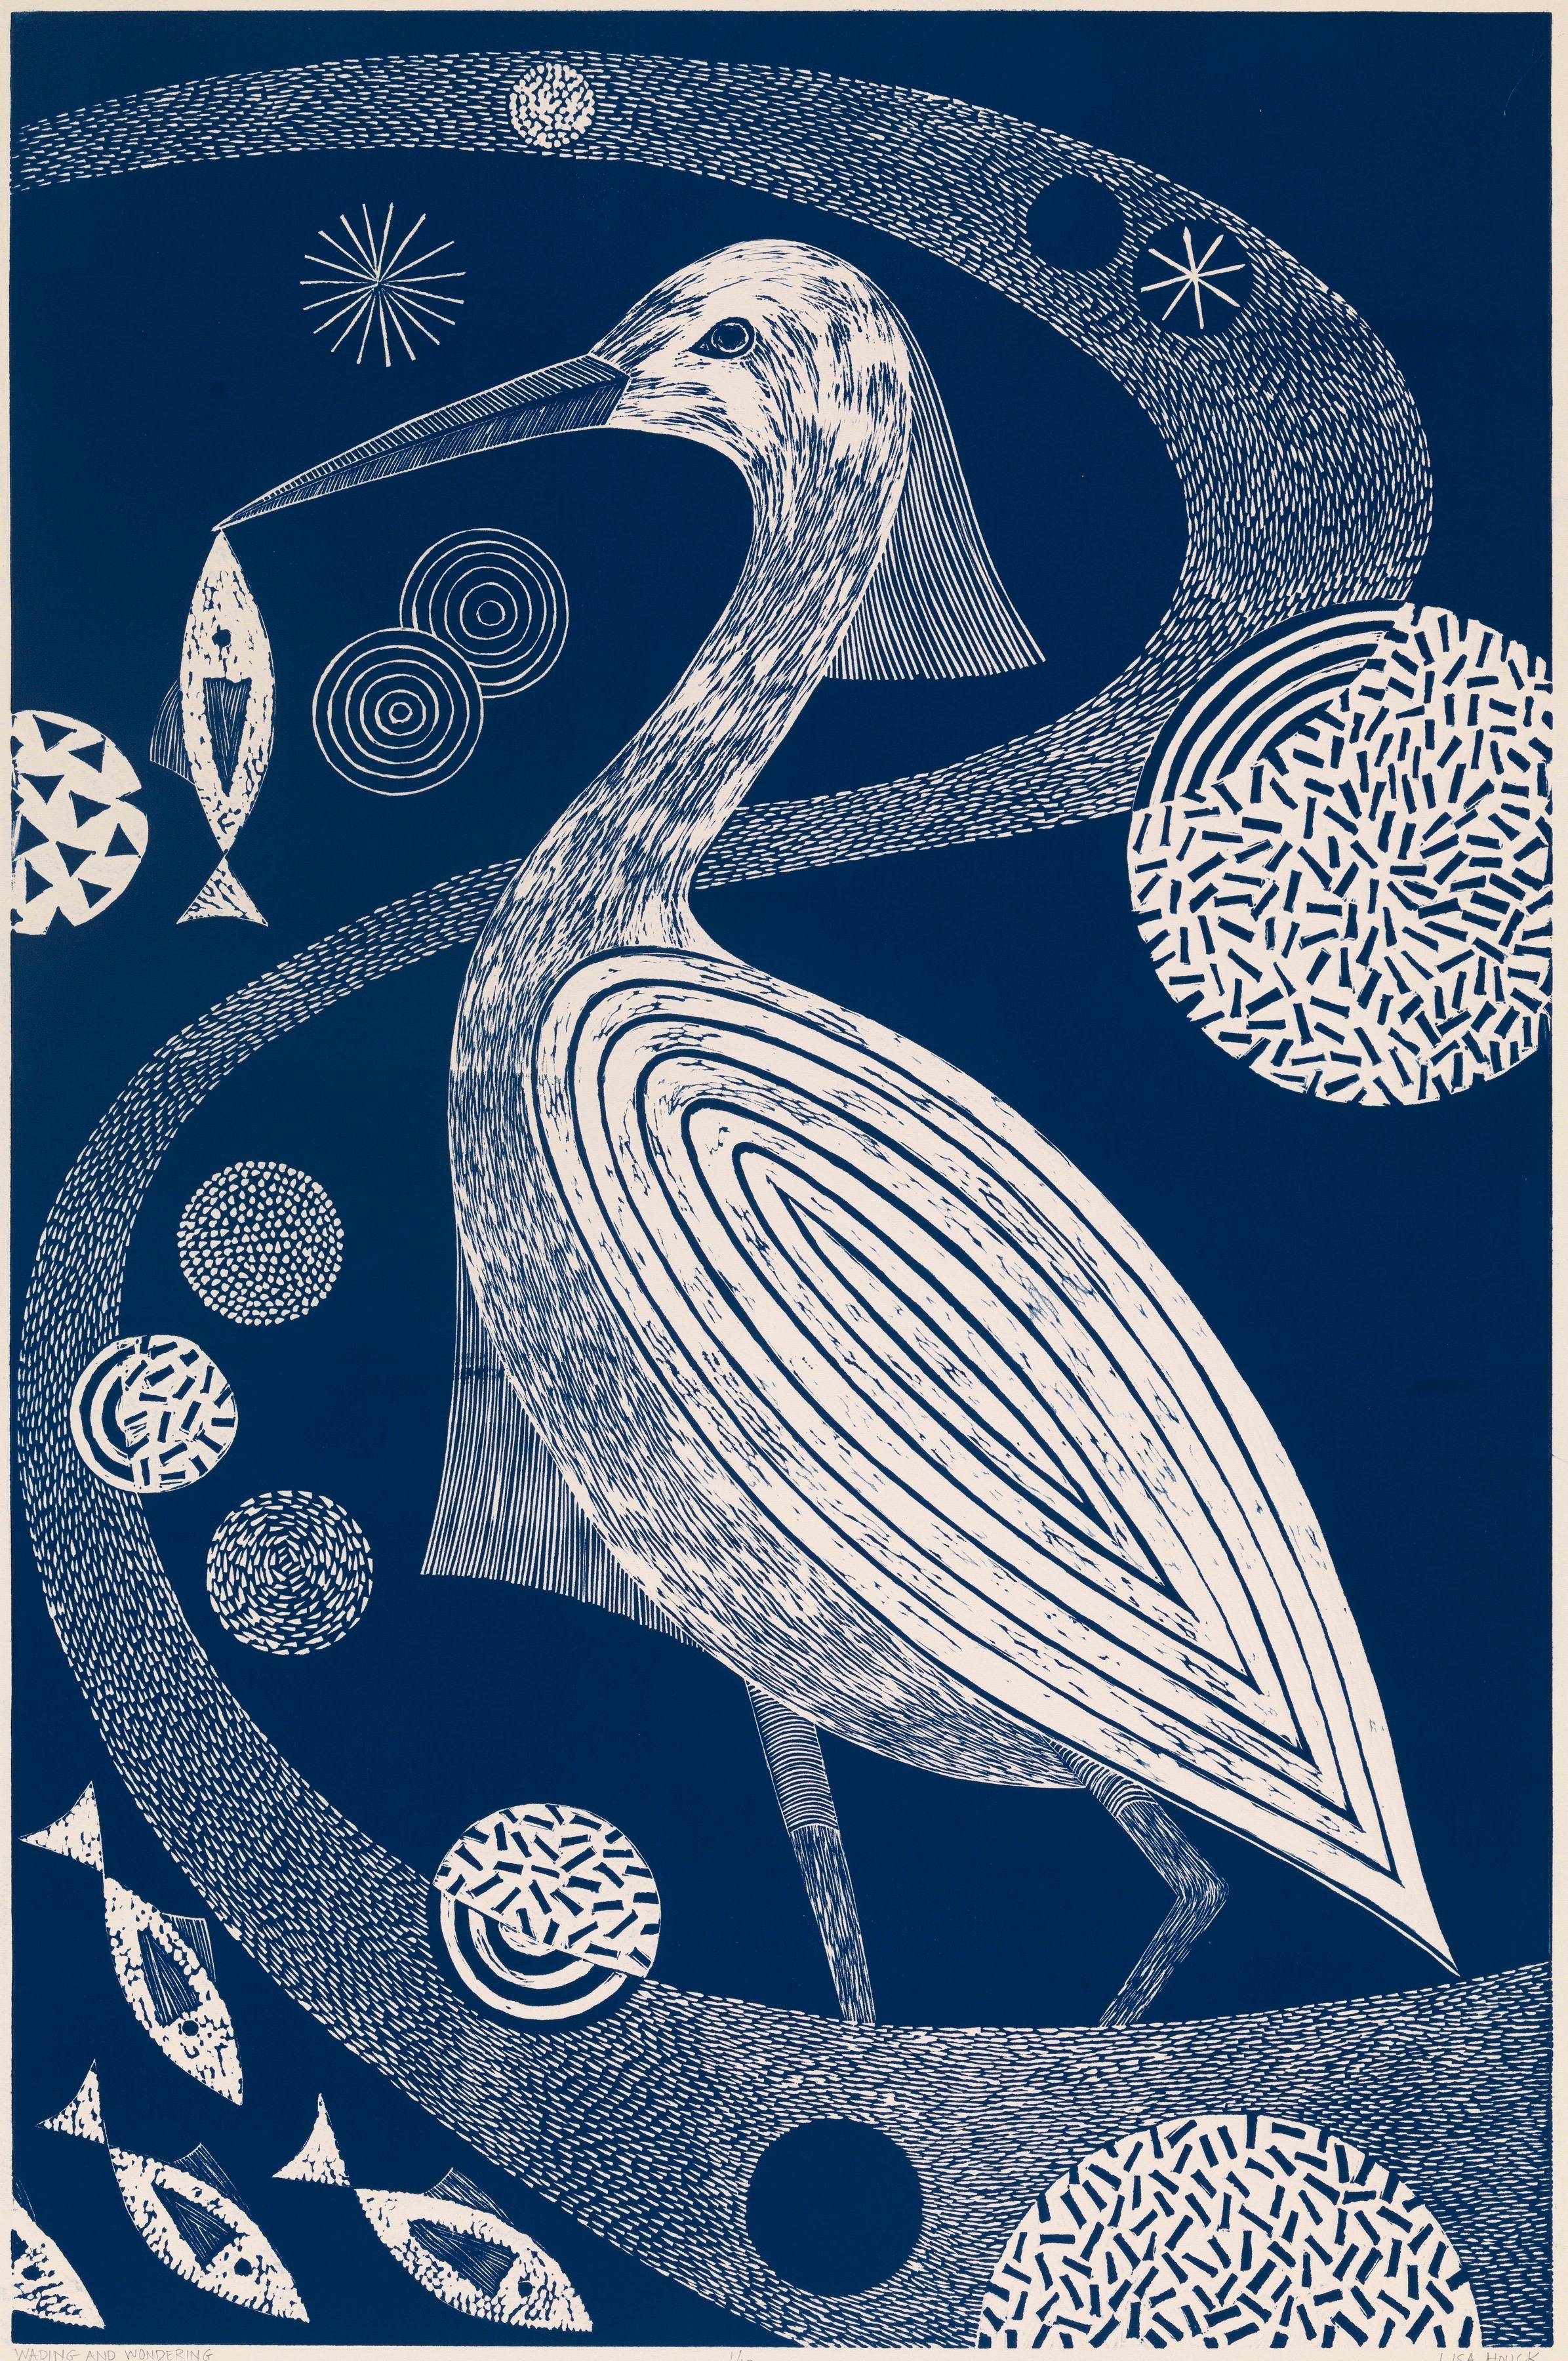 'Swooping and Swirling'  Linoleum Block Print, Edition 10,  35 1/4 x 23 1/4 Inches, is one of a series of 8 related prints in this size in varying shades of blue.   Sold individually or as sets of 2, 3, 4, 5, 6, 7 or 8. 

There is also a separate